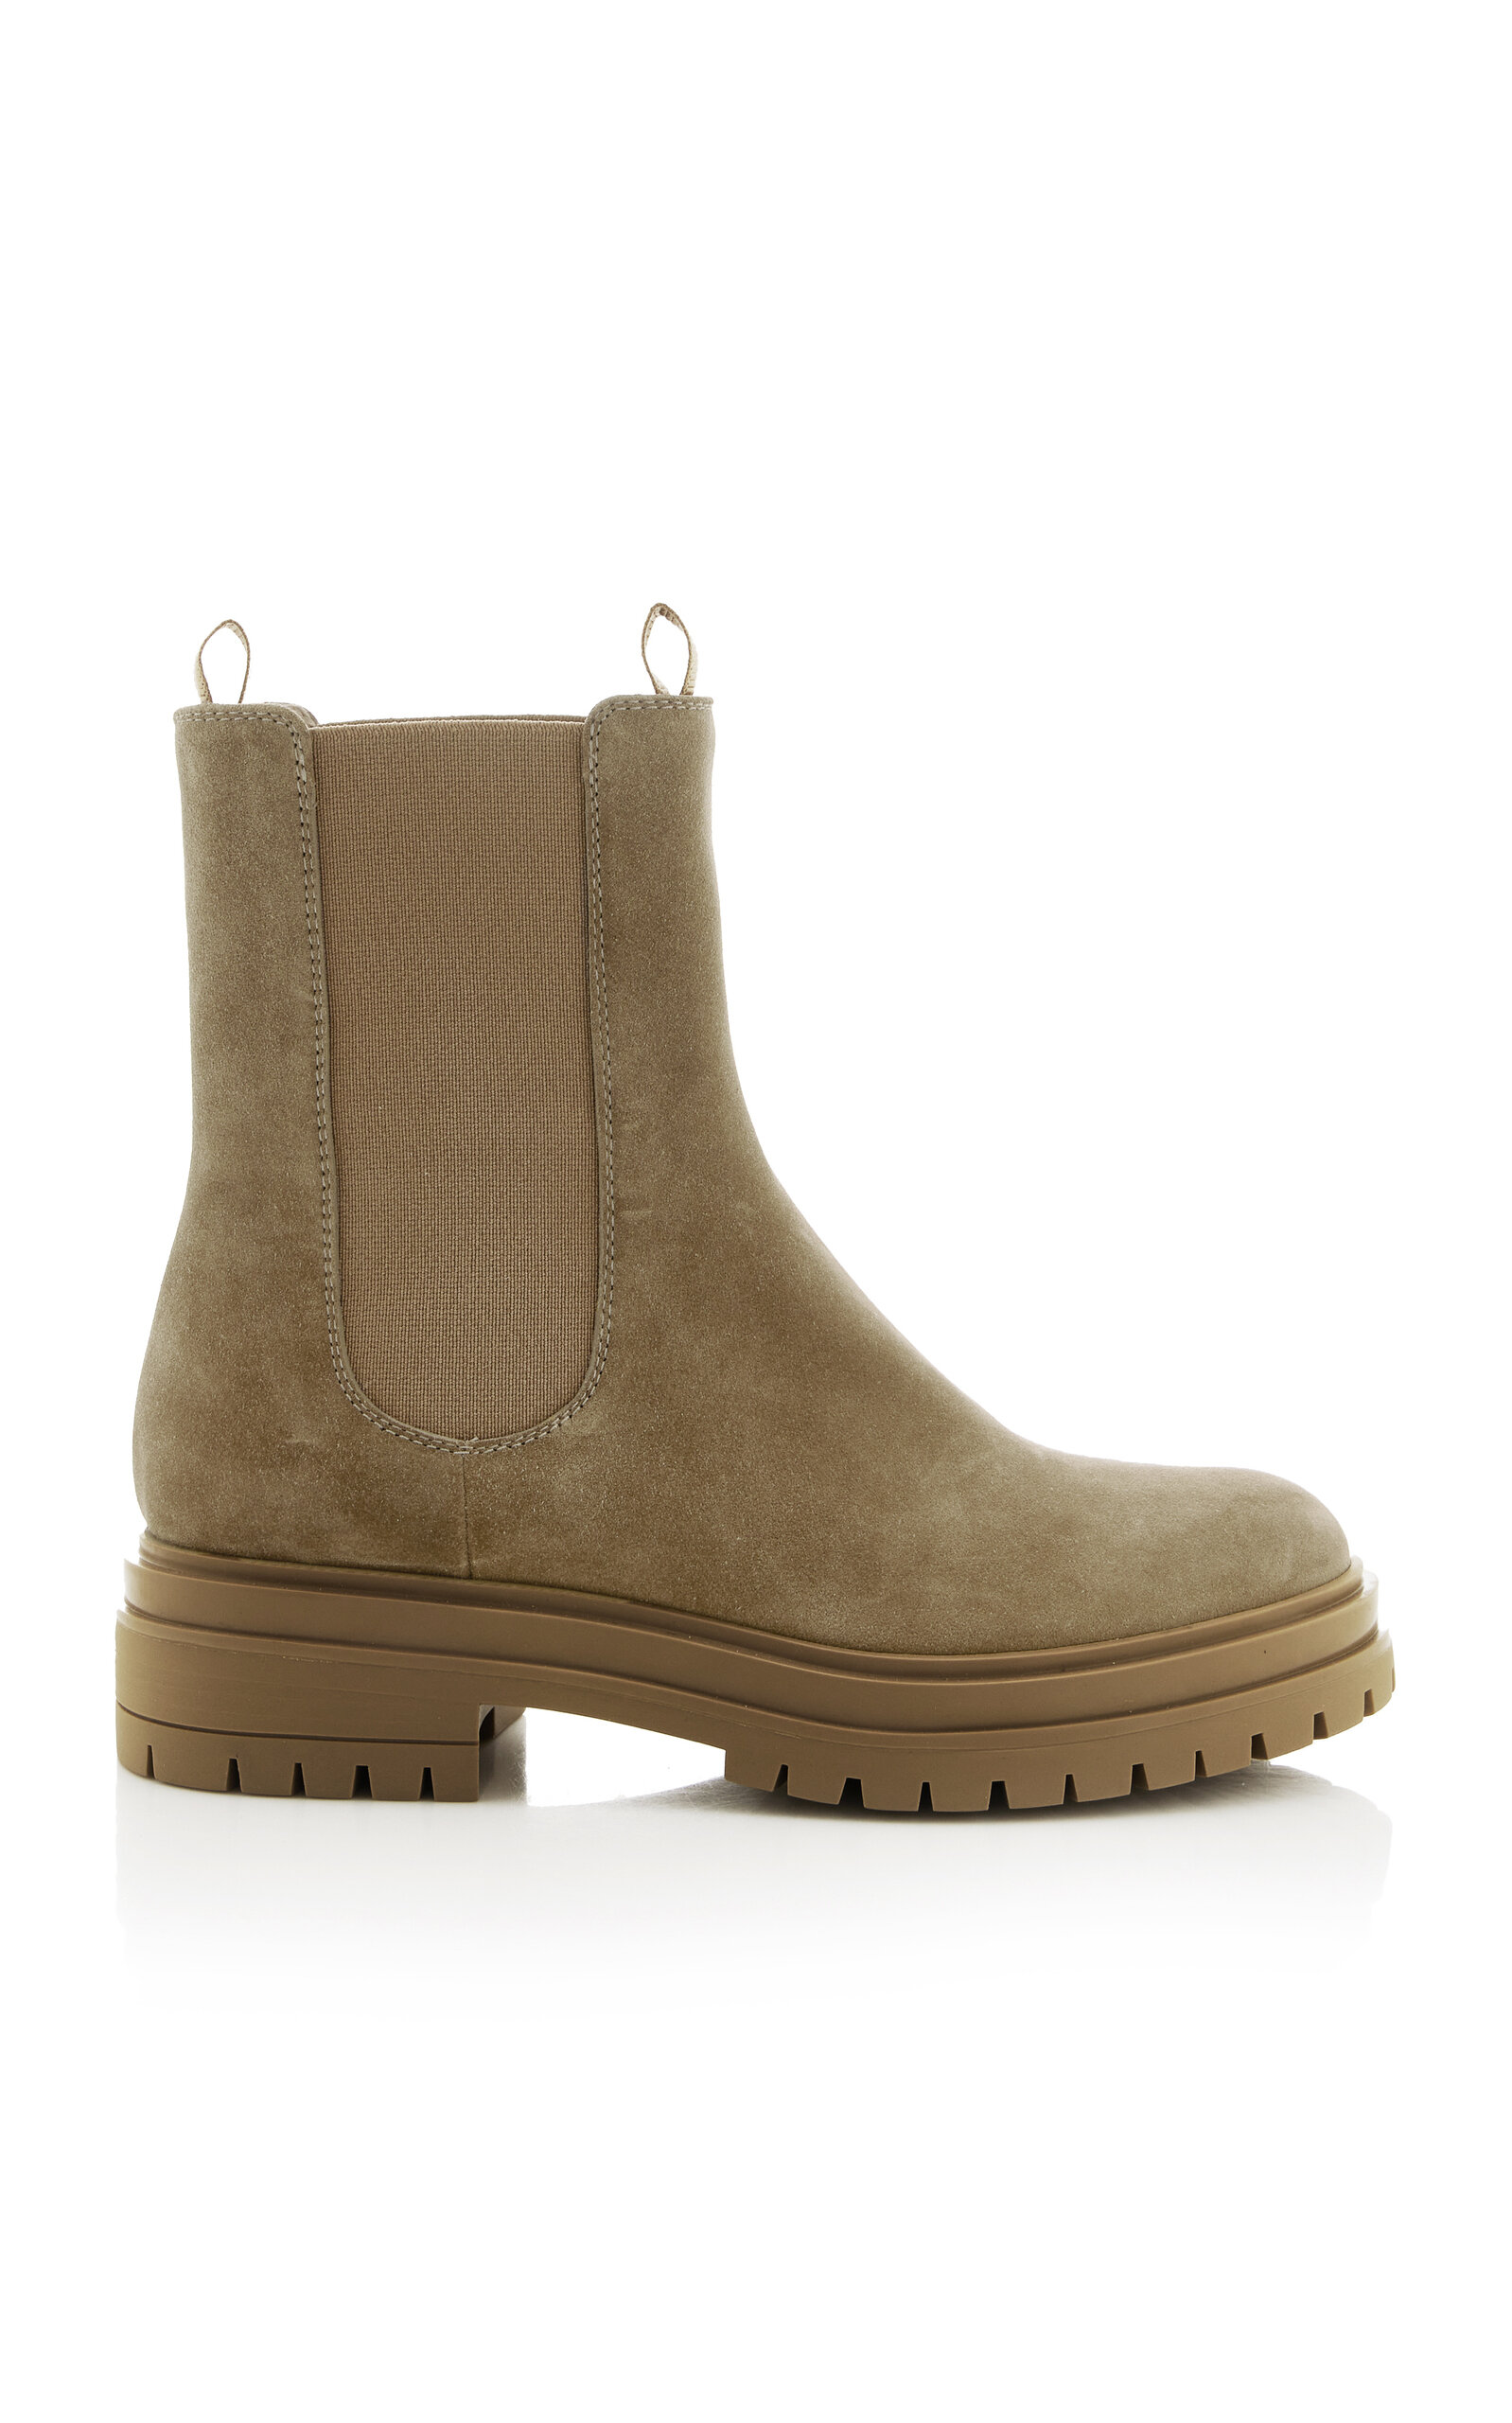 Gianvito Rossi Chester Suede Chelsea Boots In Tan